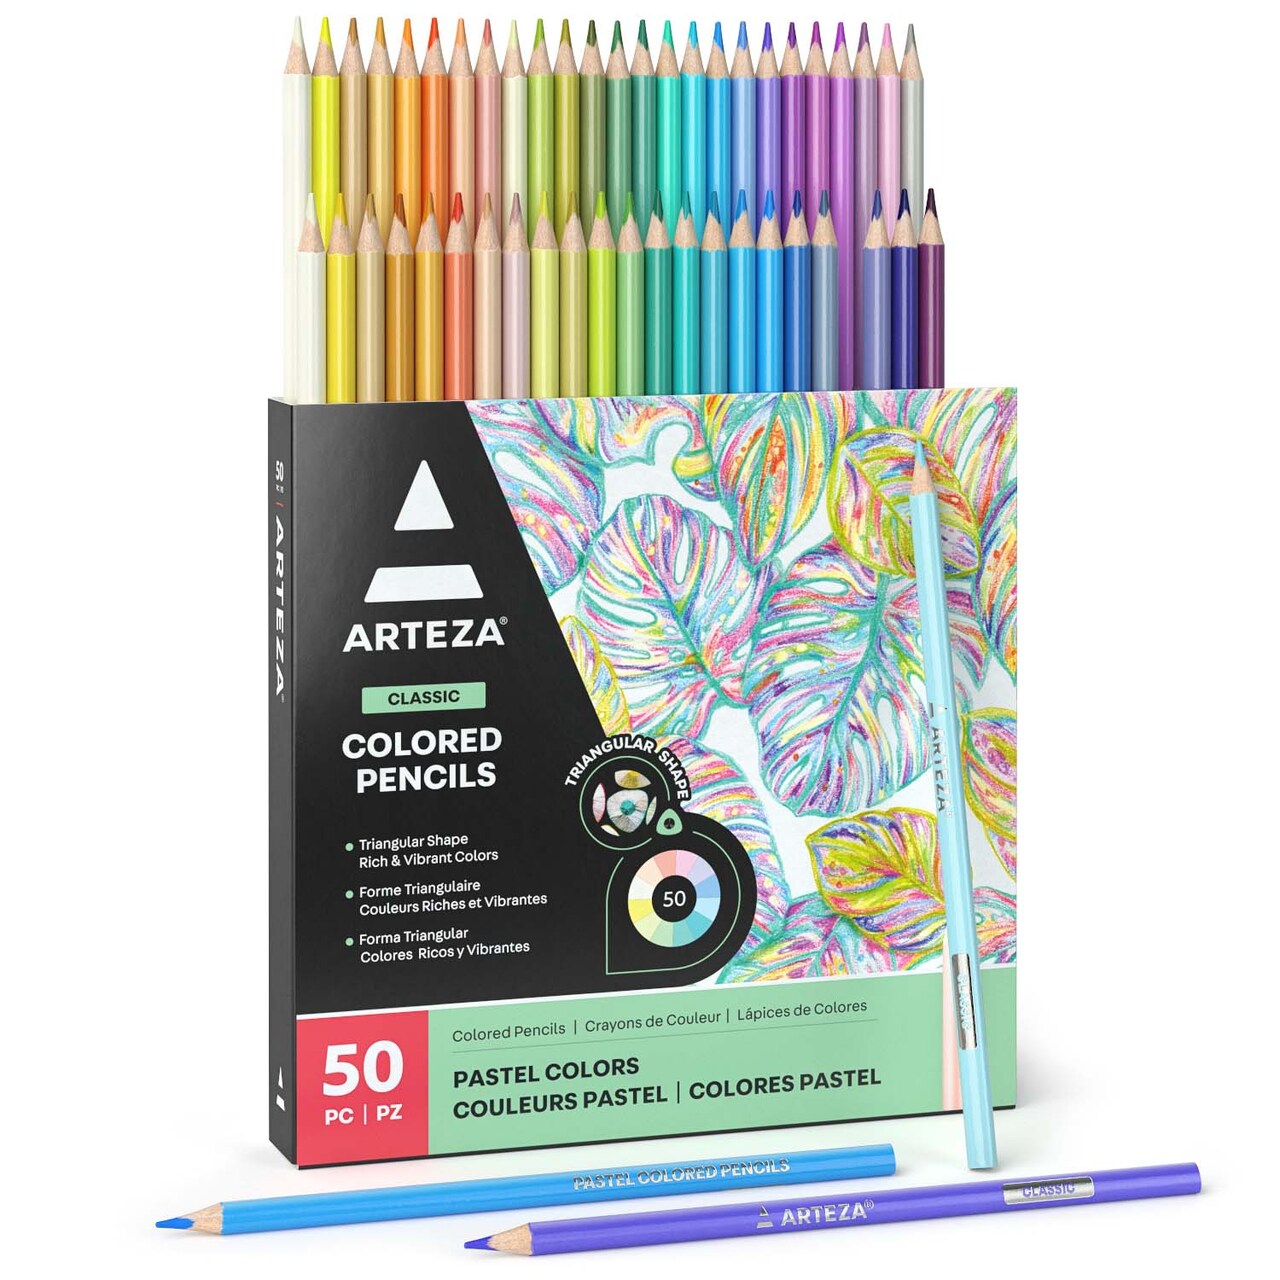 Arteza Pastel Colored Pencils, Set of 50, Triangular Grip, Pre-Sharpened Coloring  Pencils, Art Supplies for Coloring and Drawing